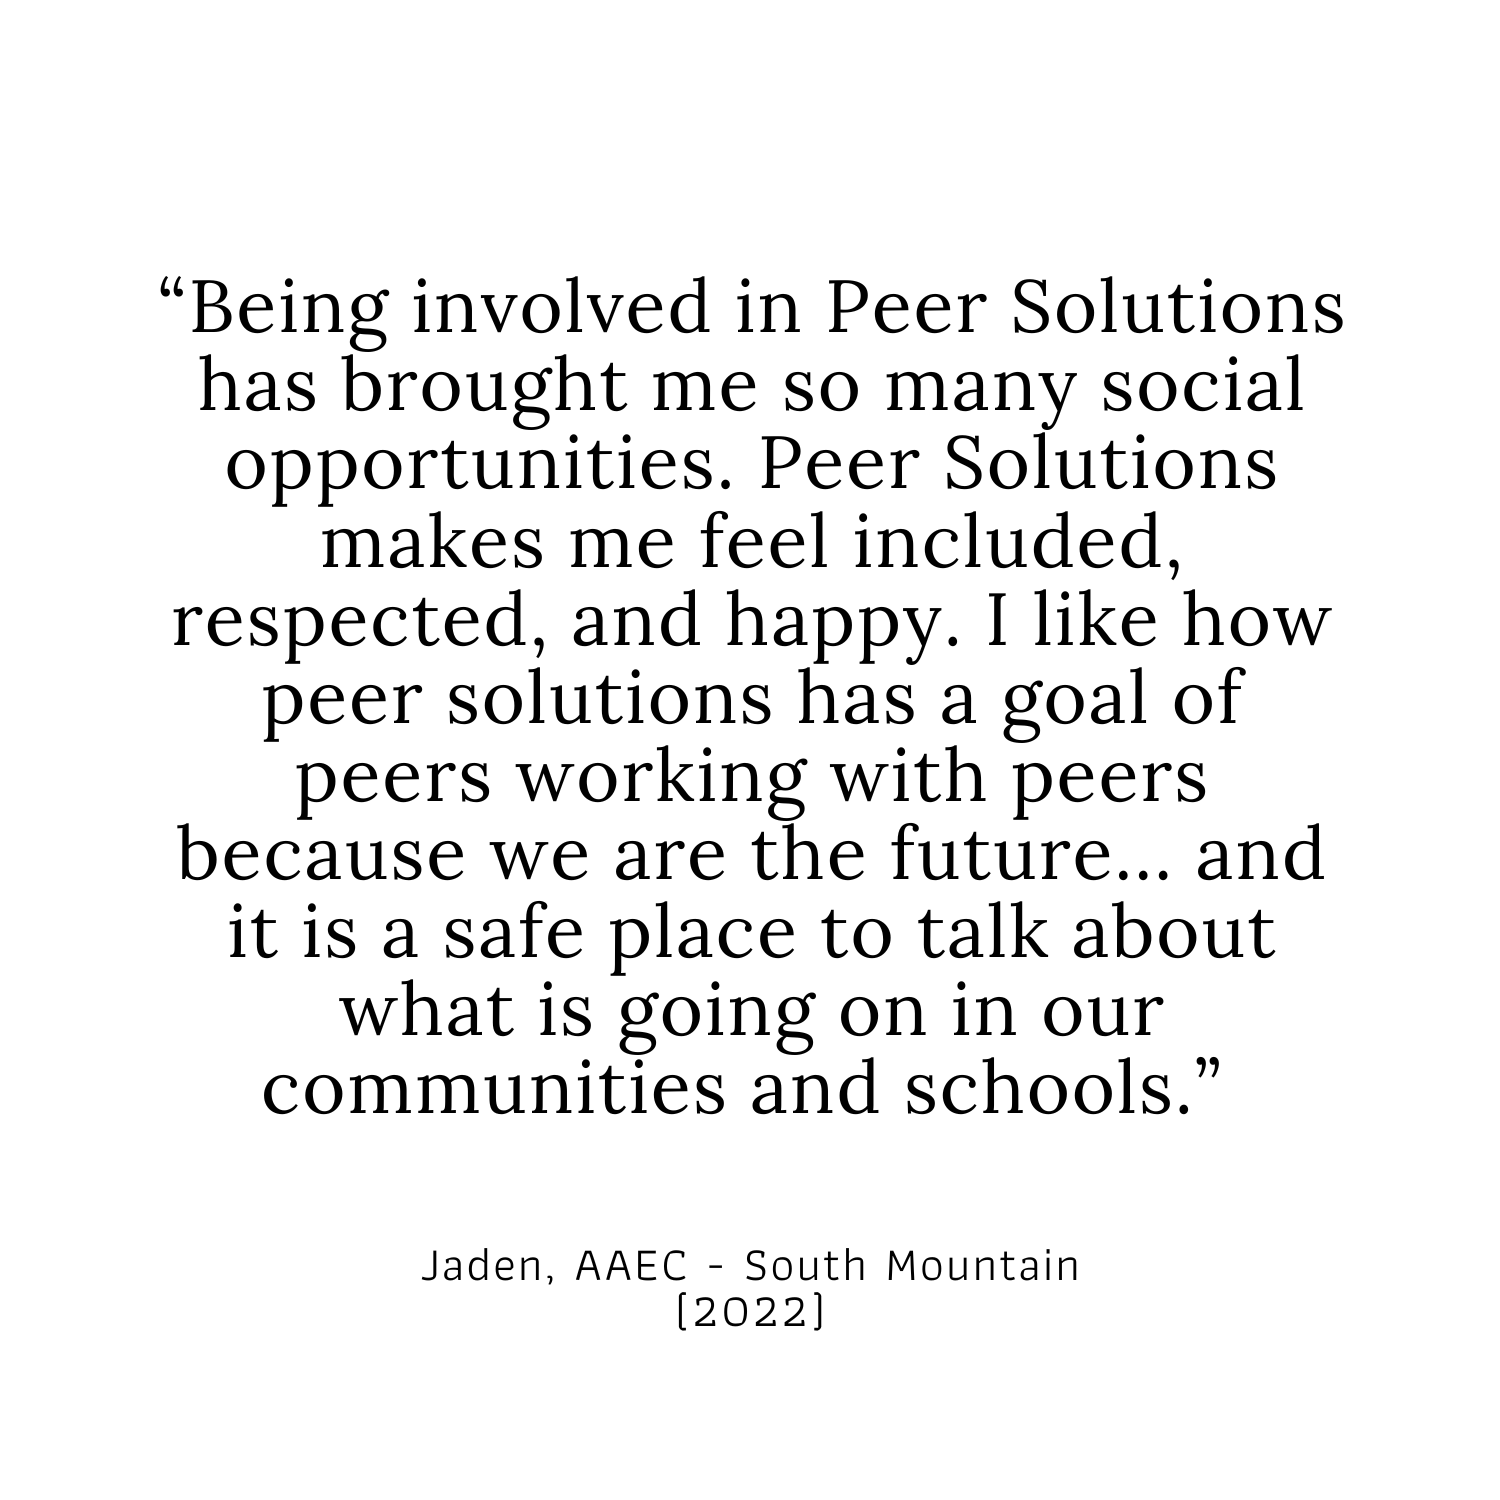 being involved in peer solutions has brought me many social opportunities.